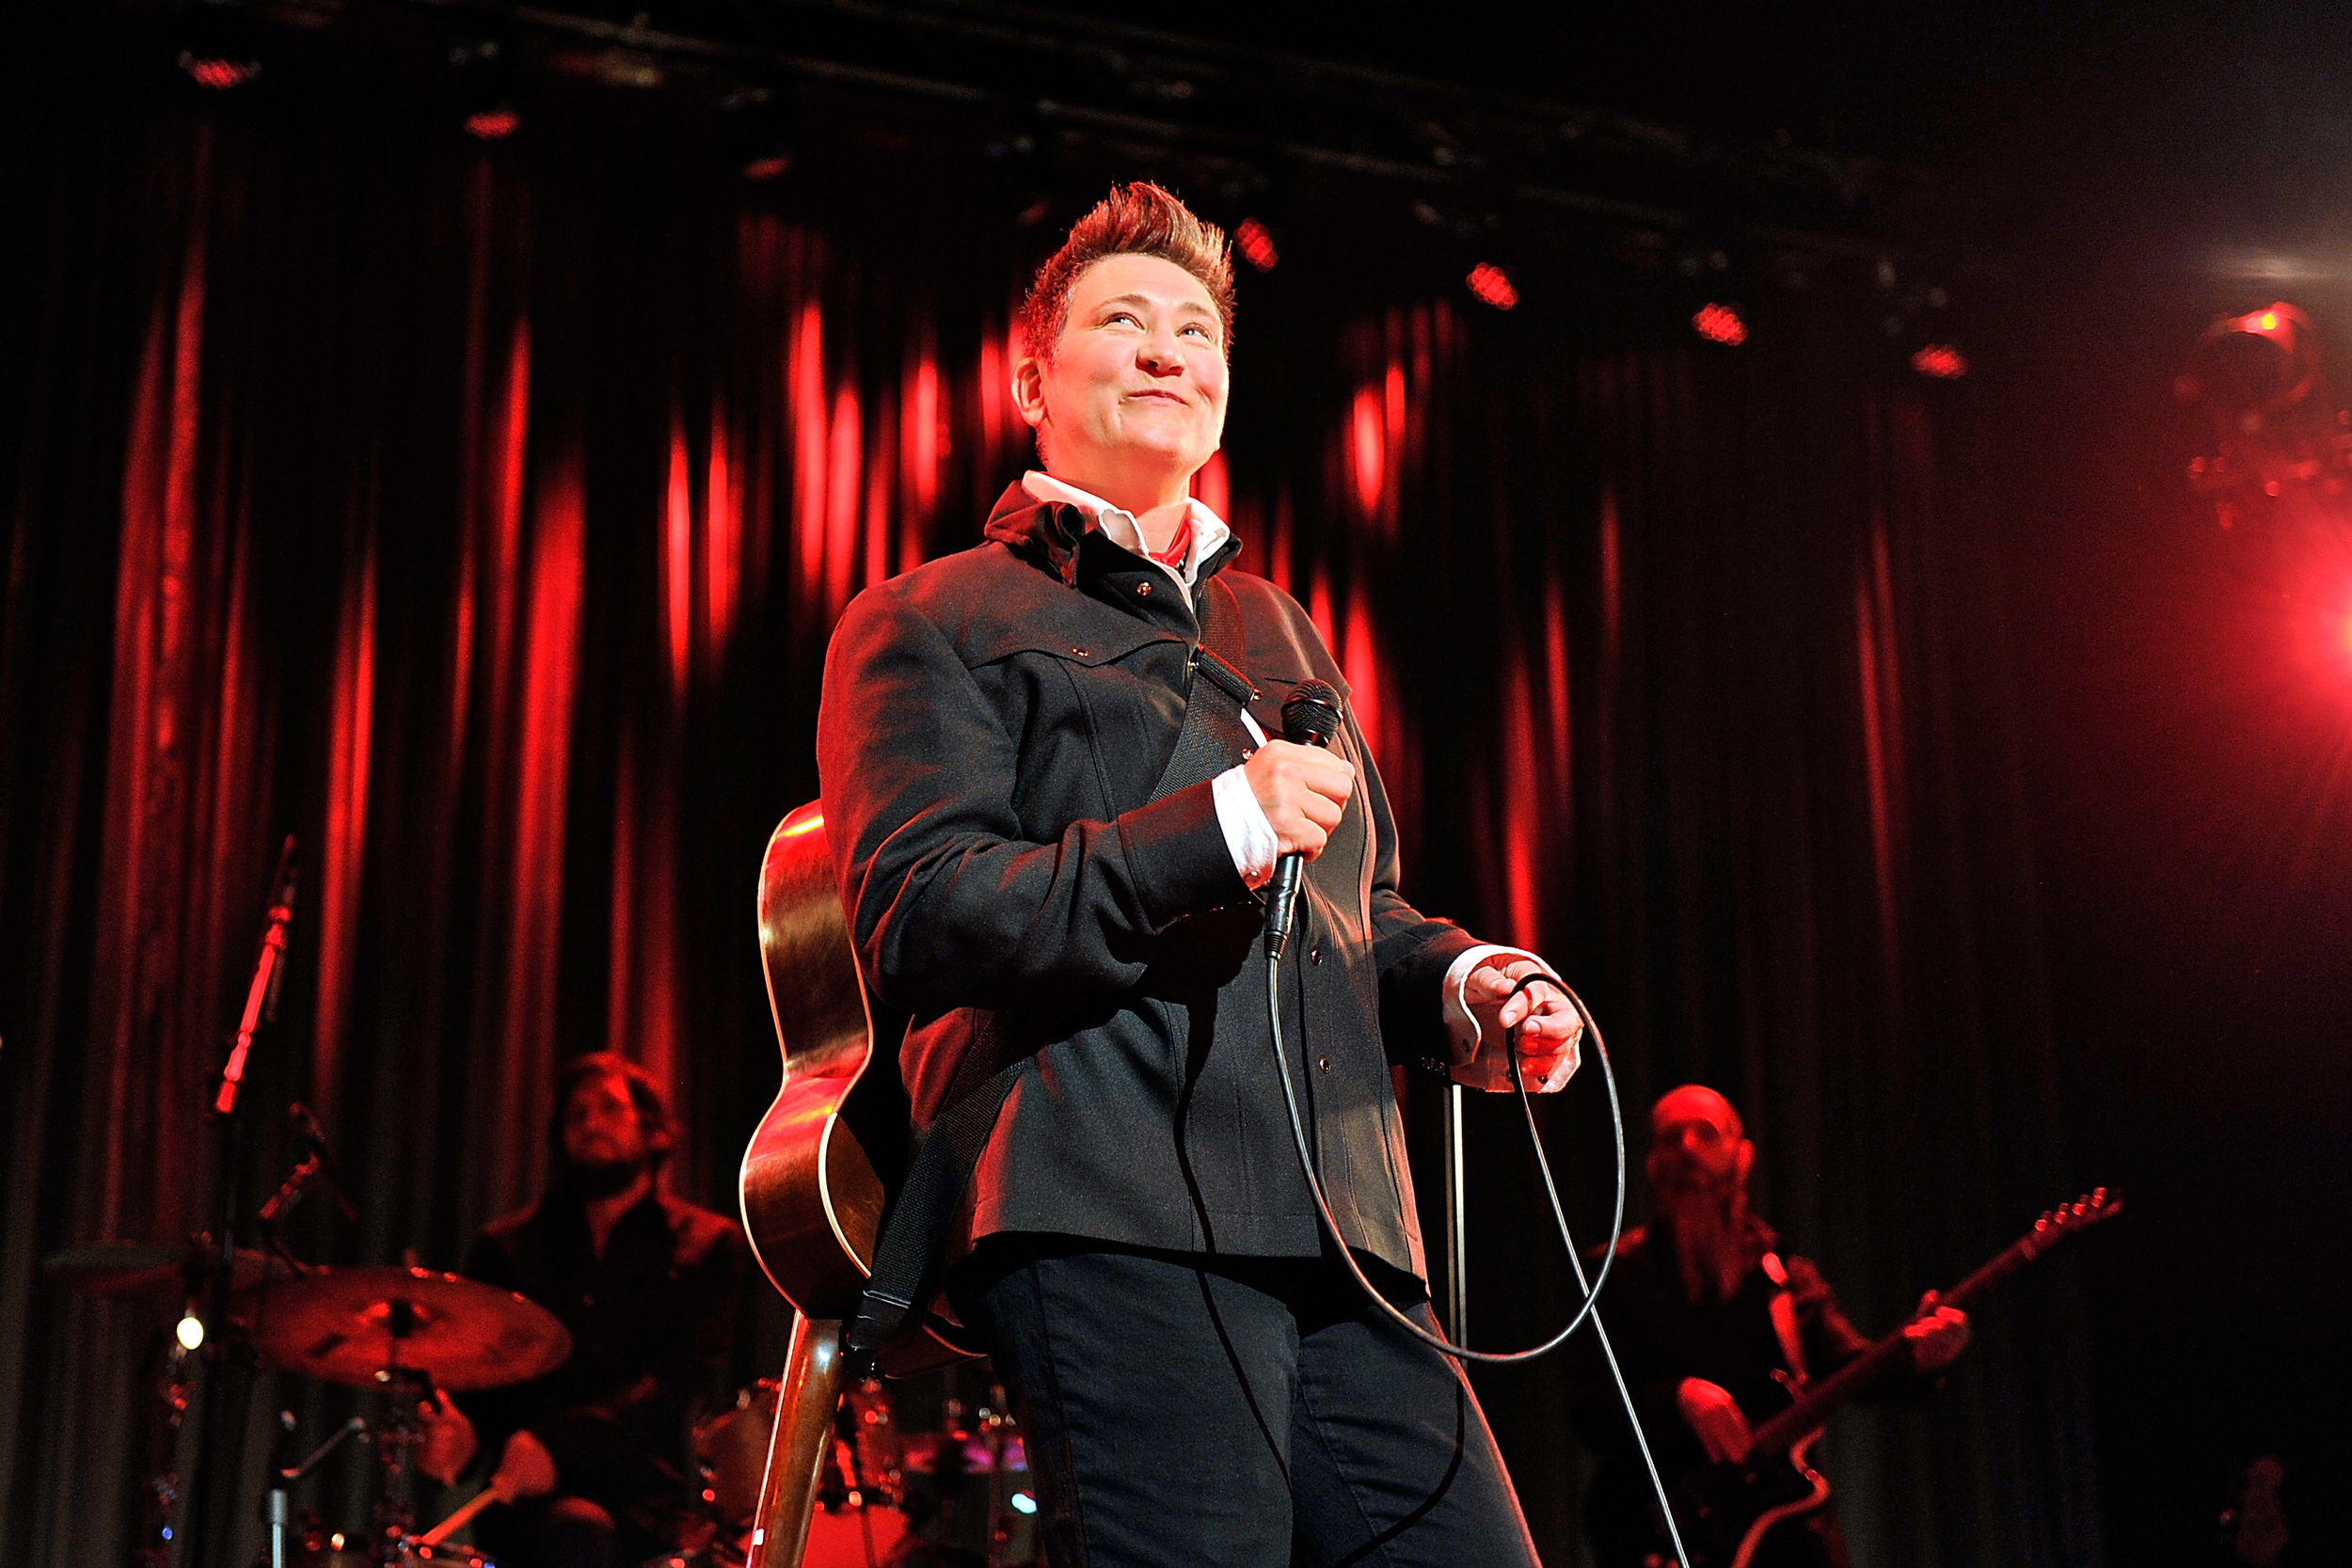 <p>Canadian artist k.d. lang’s sound has flitted between pop and country throughout her career, recording songs with Ann Wilson and Roy Orbison while challenging the notion of what it means to be a country singer. </p><p>You may also like: <a href='https://www.yardbarker.com/entertainment/articles/20_essential_southern_rock_classics/s1__38769359'>20 essential Southern rock classics </a></p>